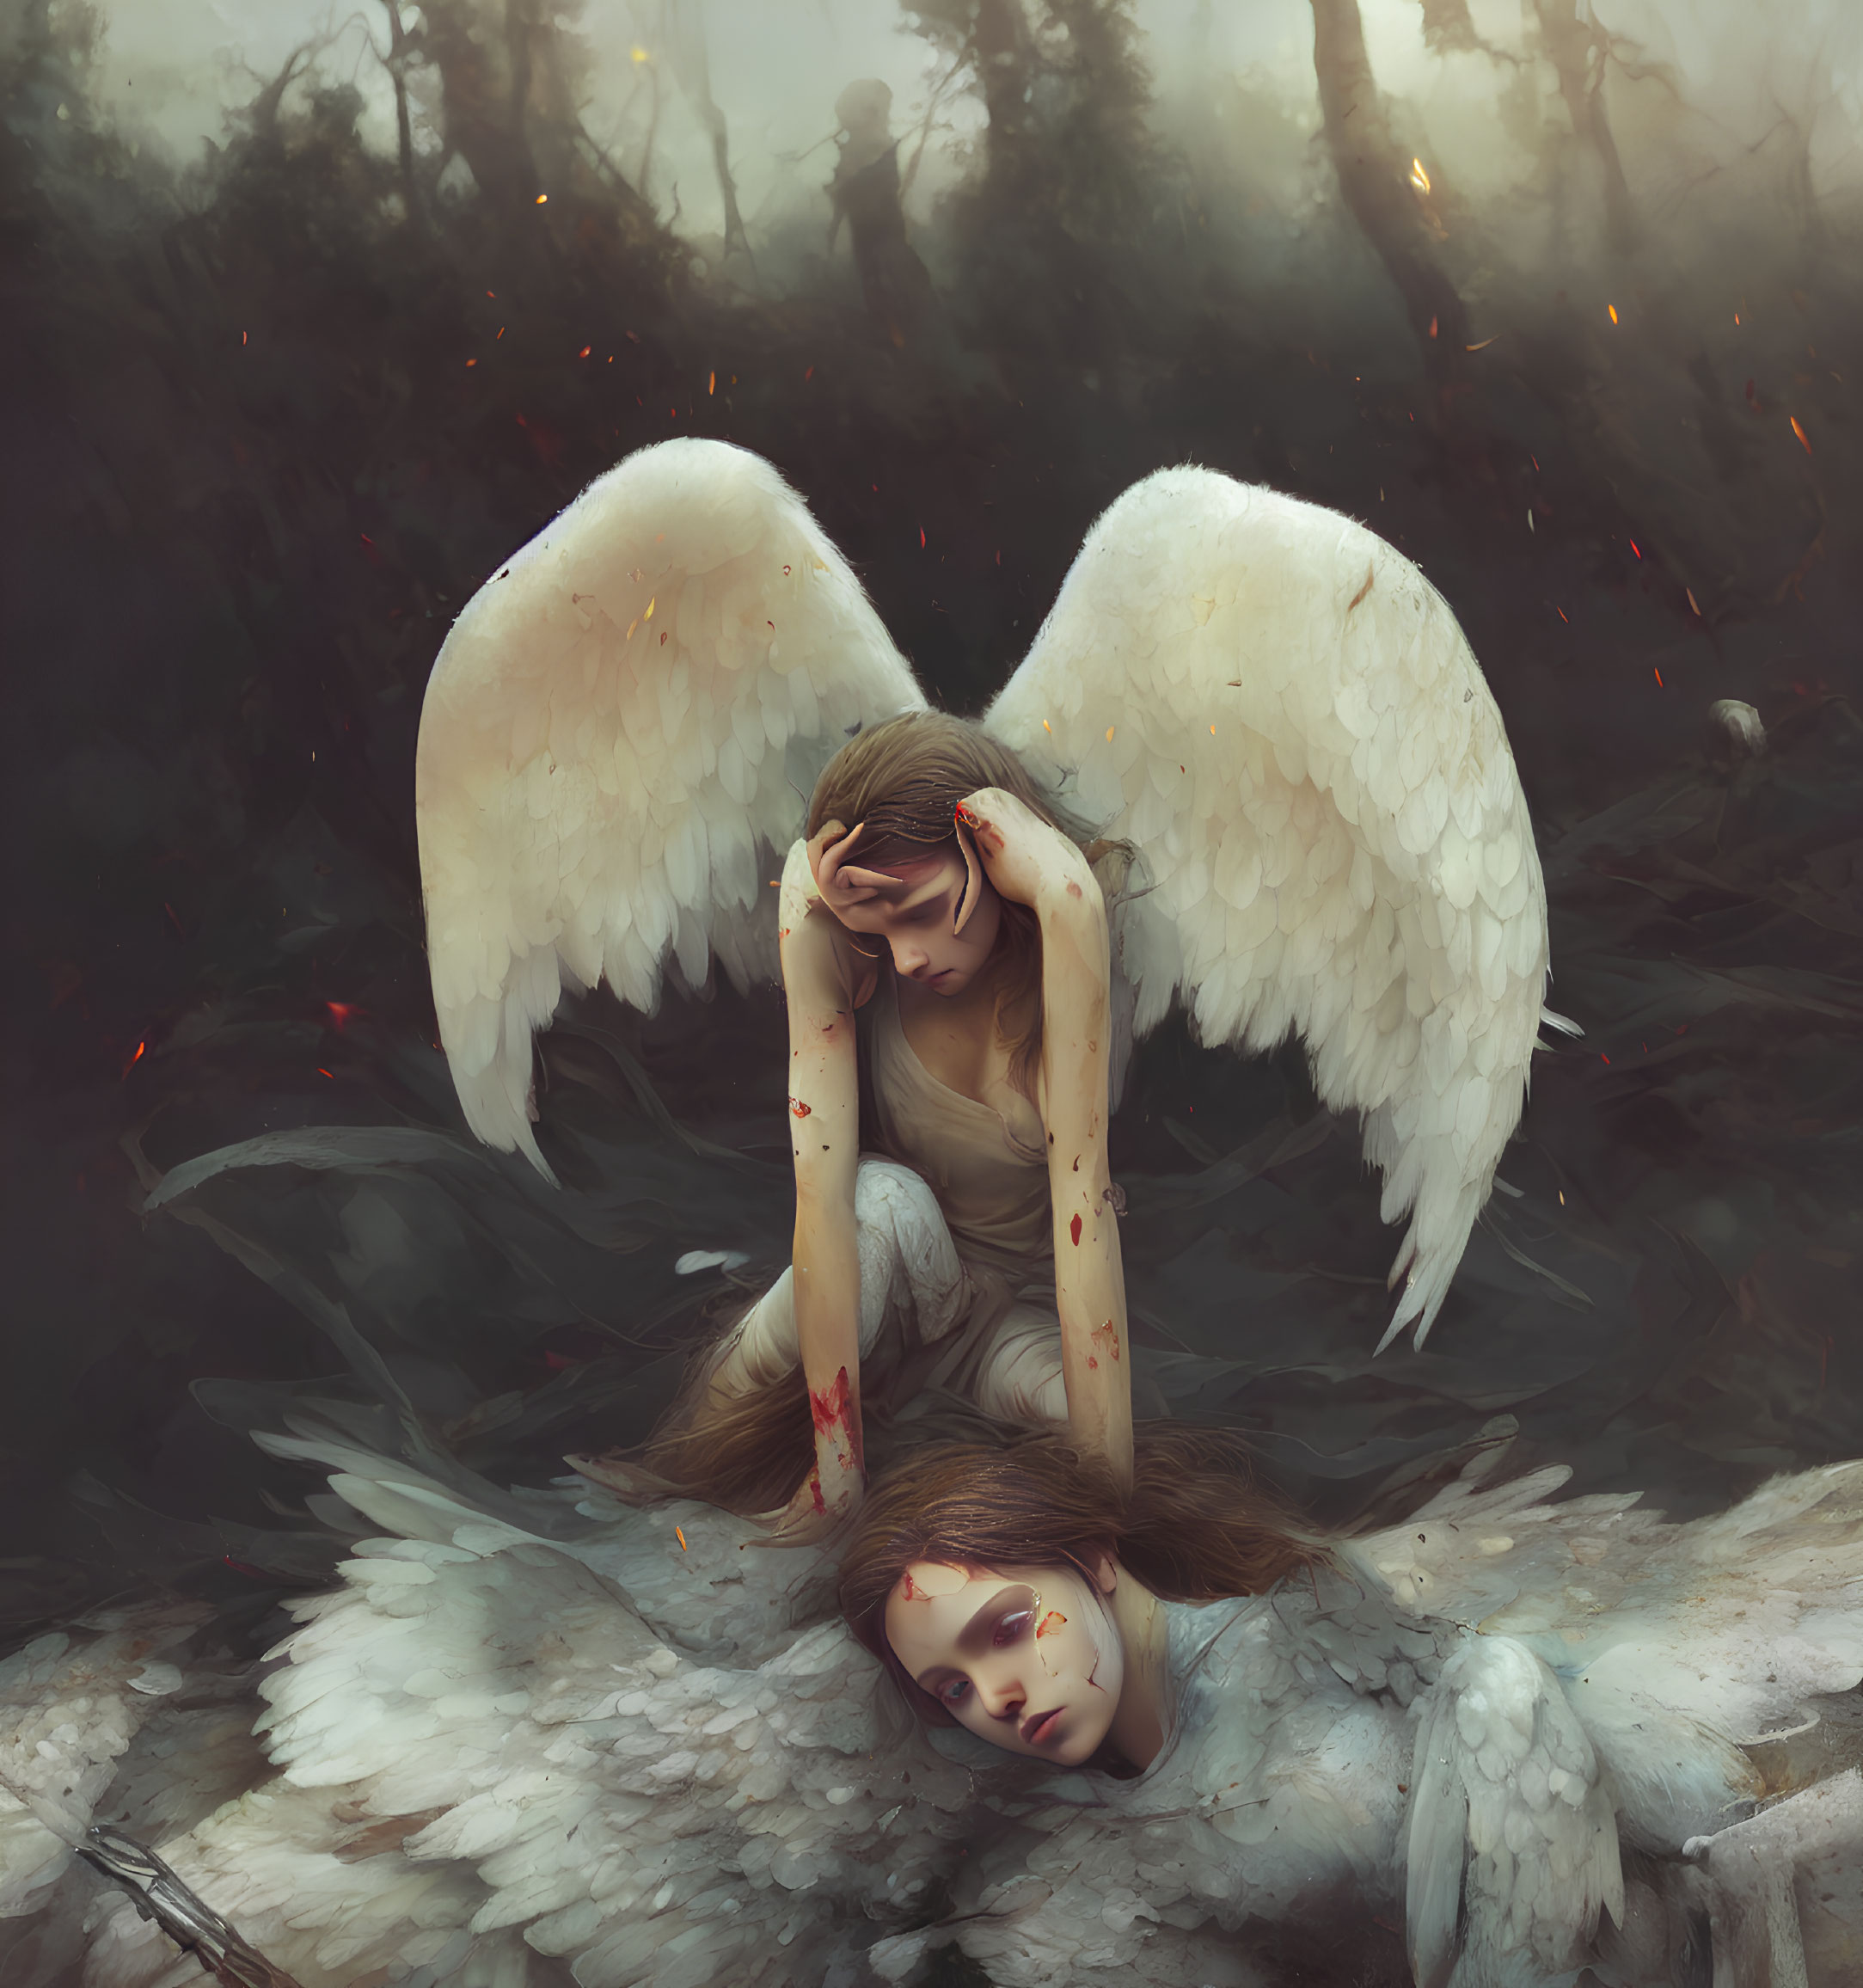 Melancholic angel with bloodstained wings in misty forest scene